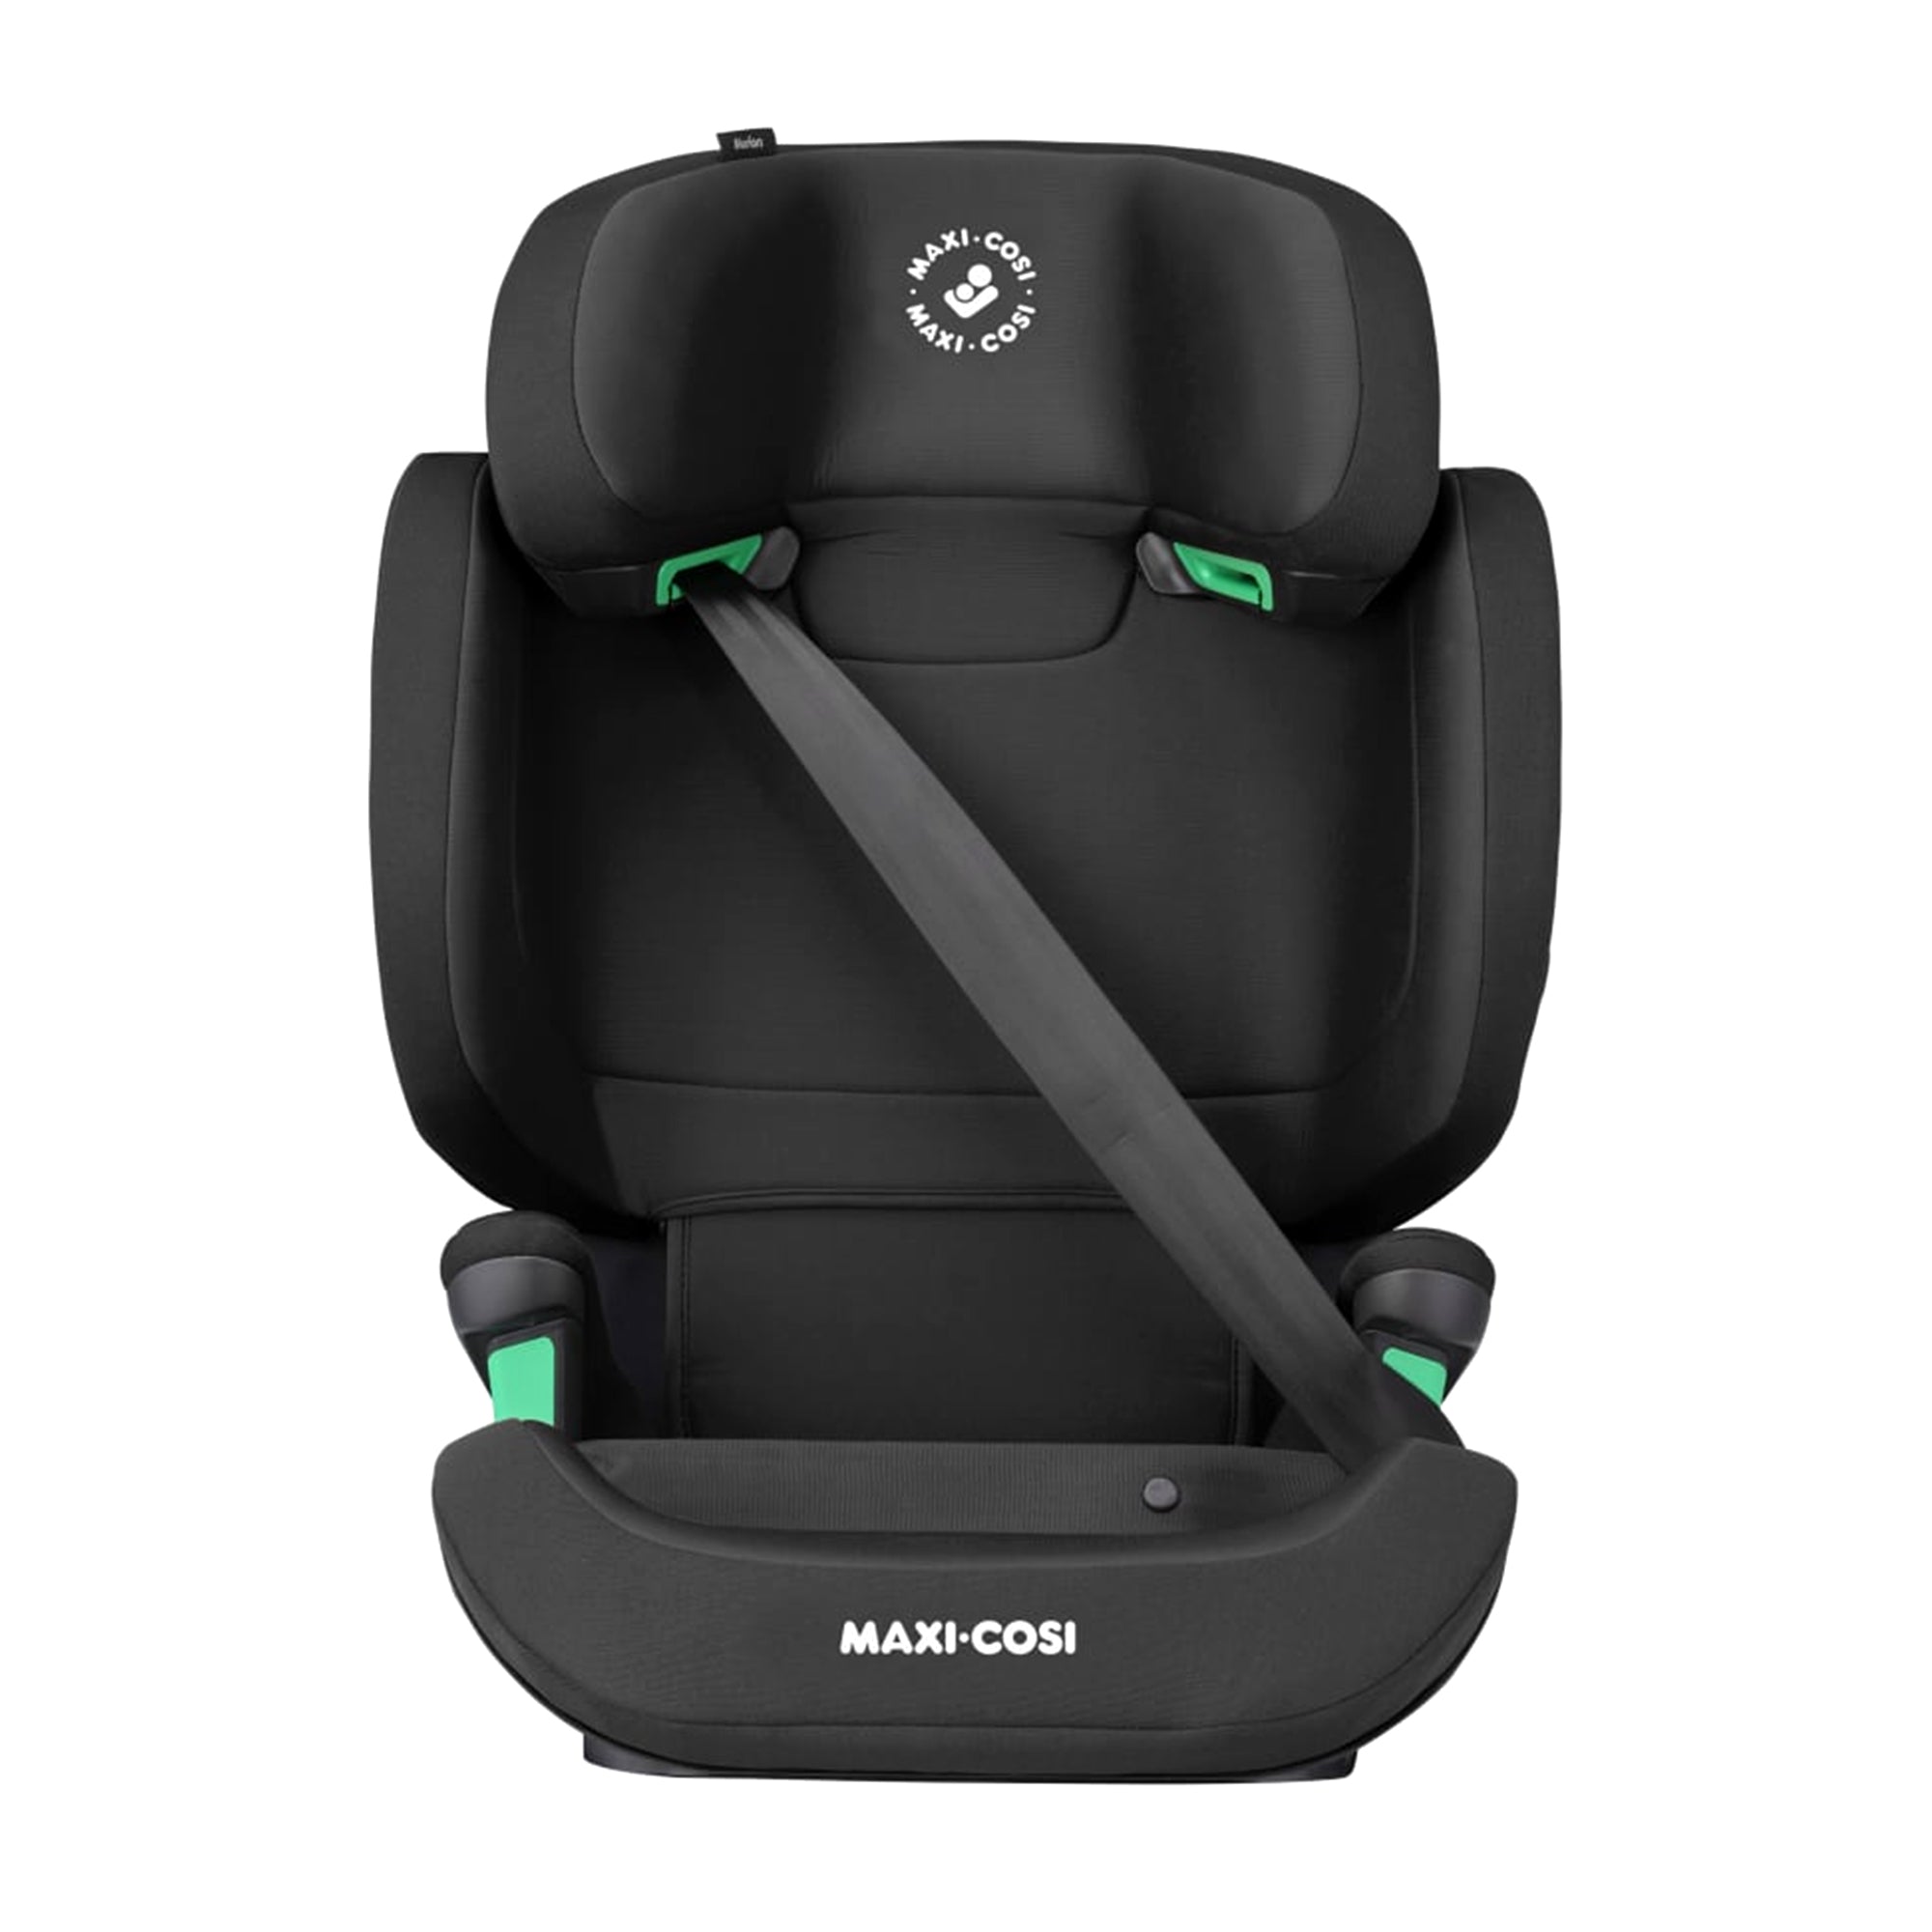 Maxi Cosi Car Seat Morion (3.5 to 12 Years) Basic Black-Distressed